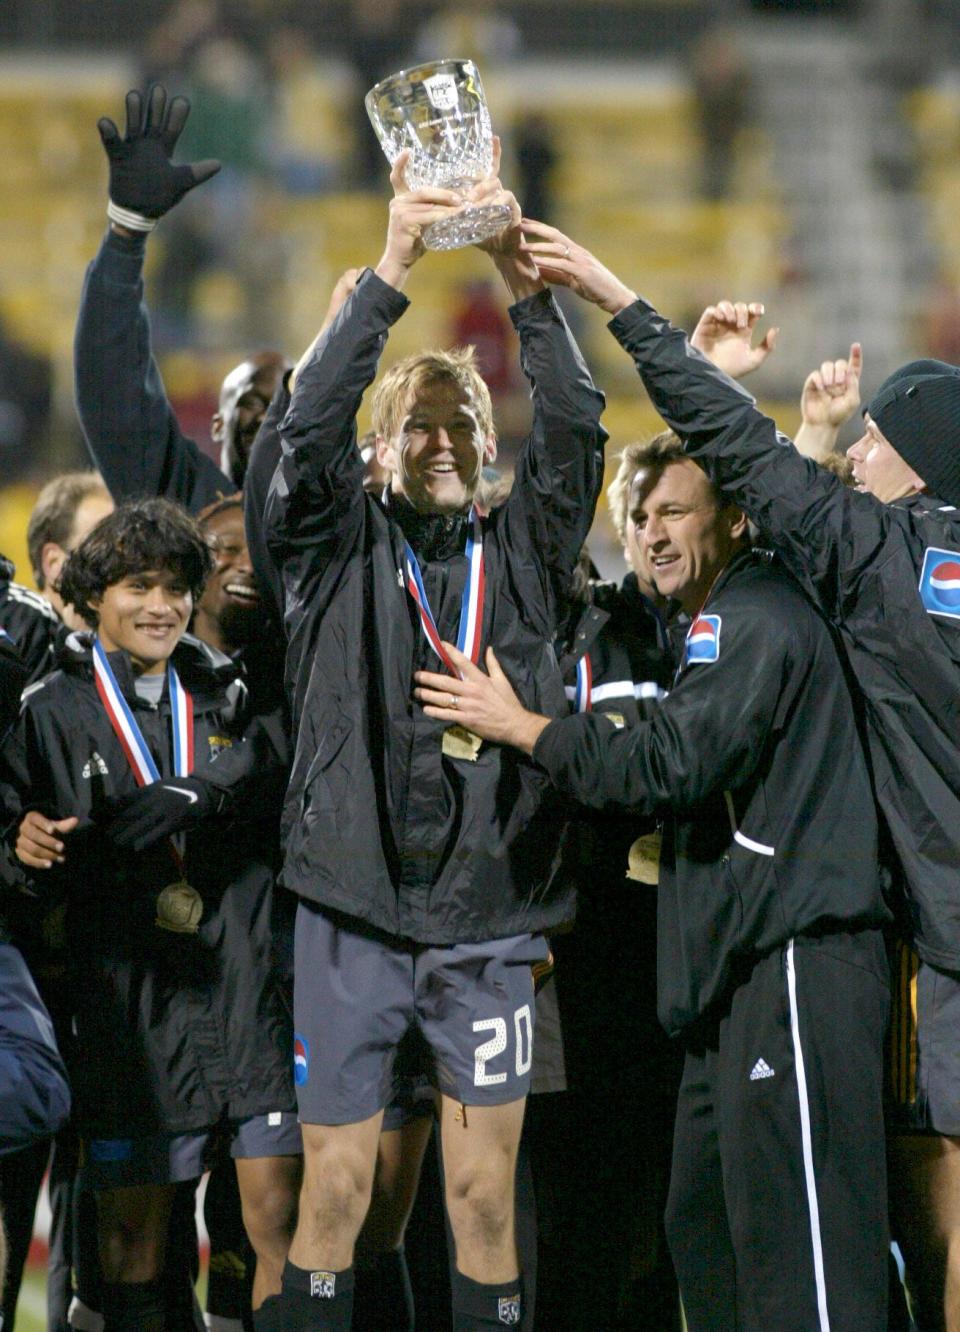 The Crew's Brian McBride holds up the trophy after winning the U.S. Open Cup in 2002.